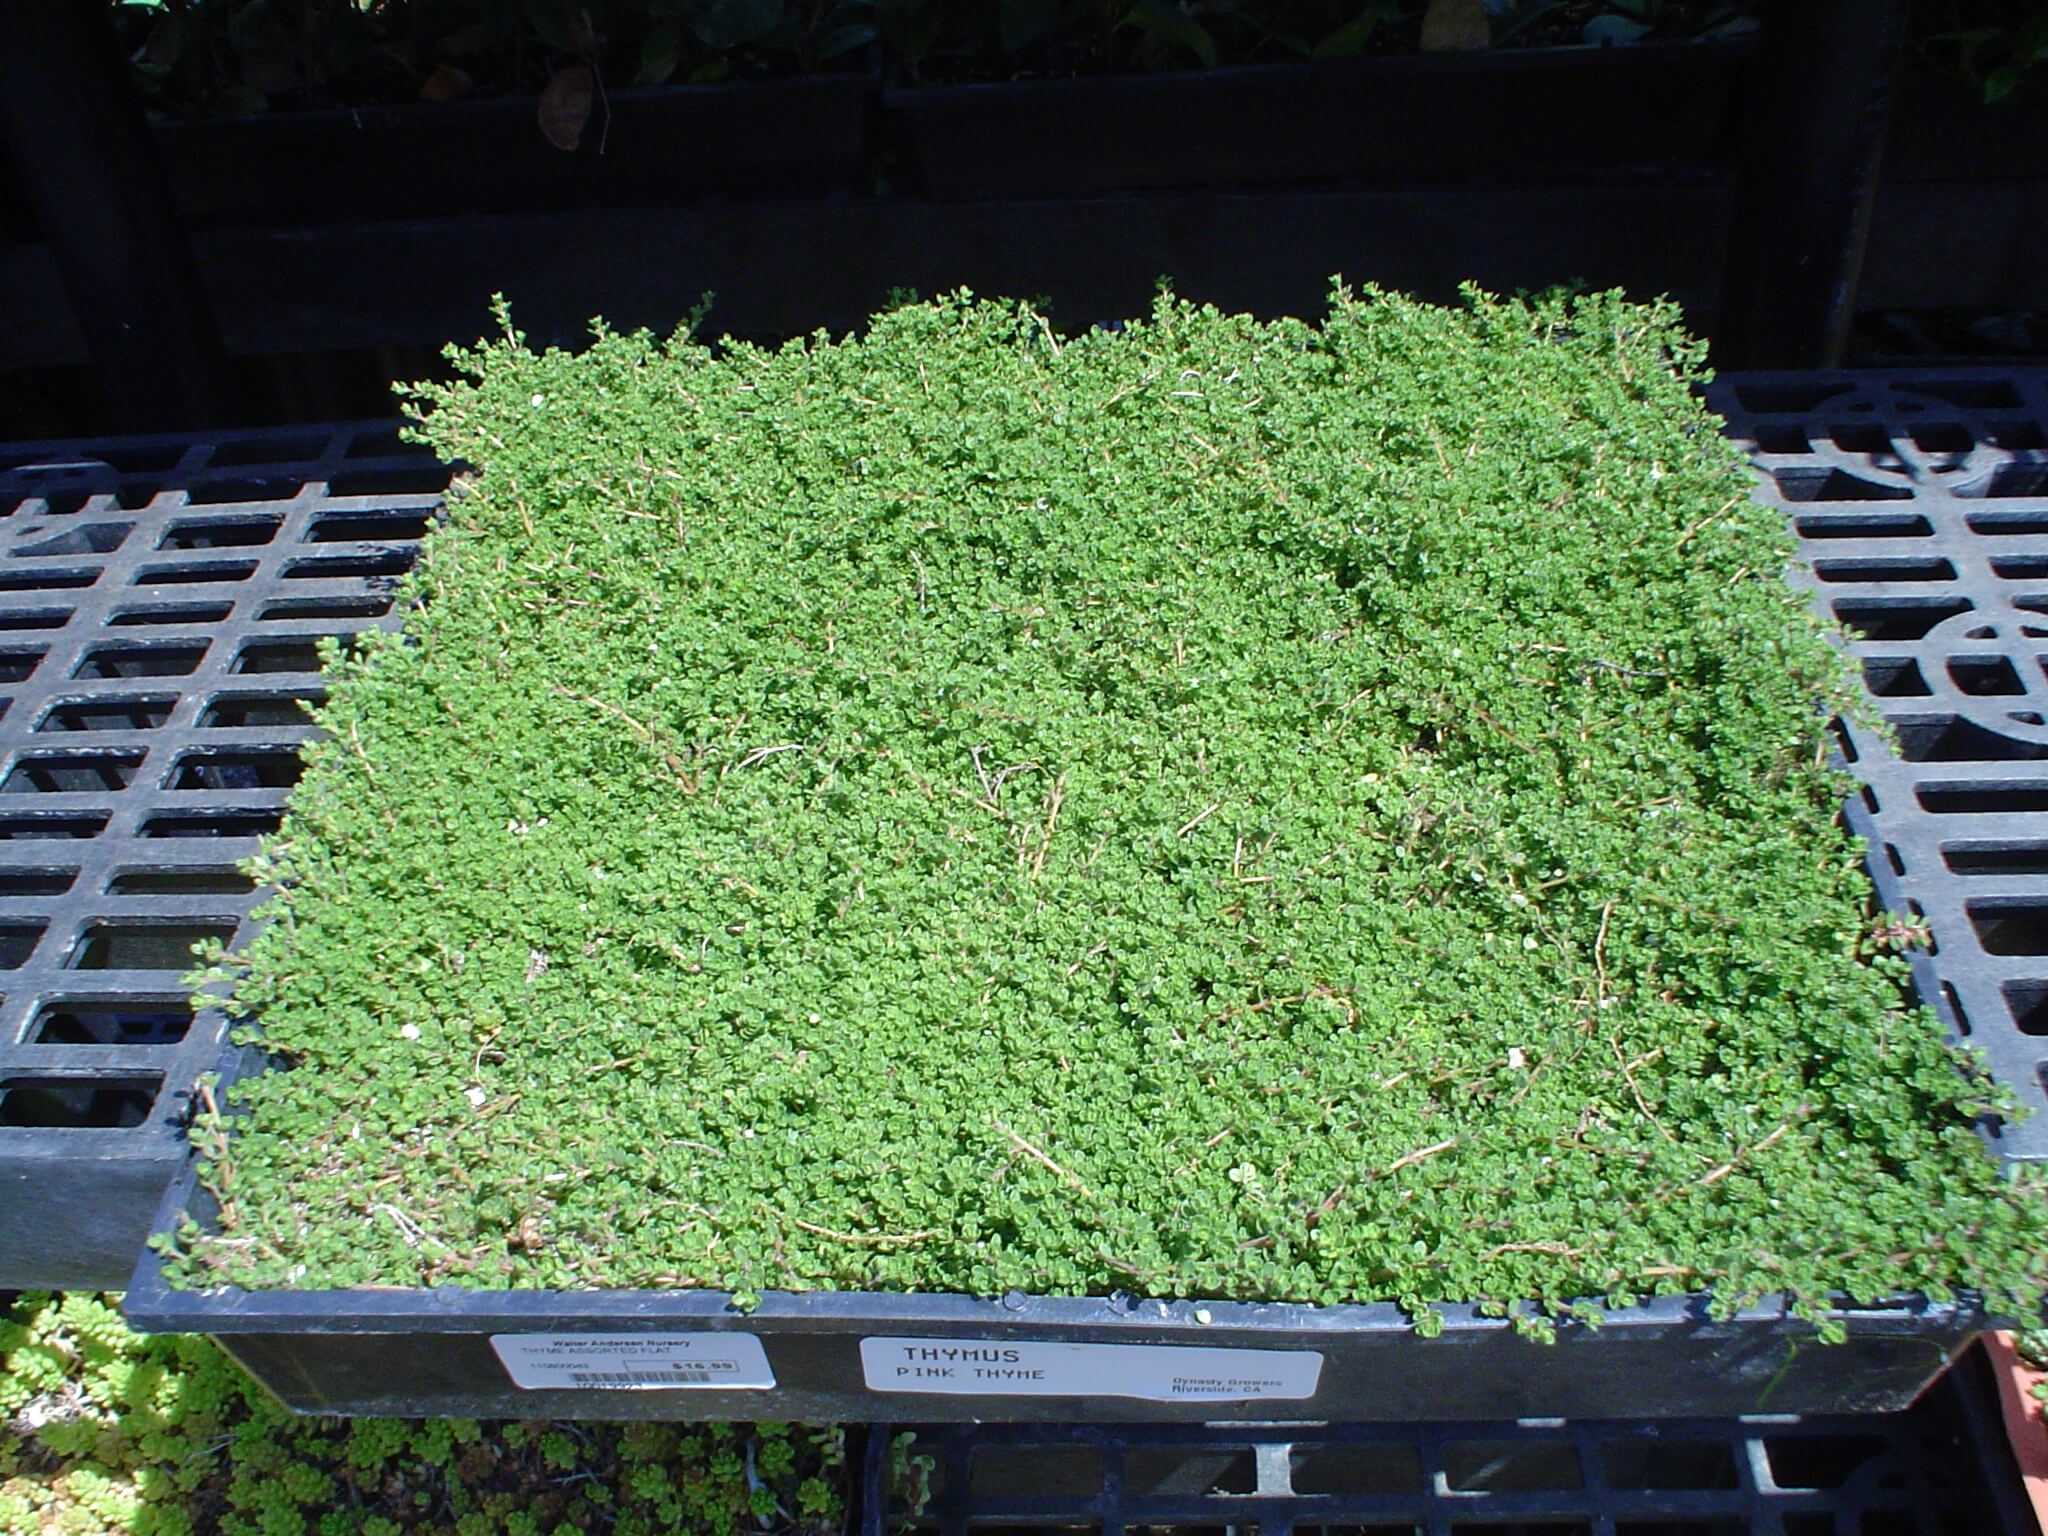 Flats of fragrant creeping thyme are perfect for greening up gaps in flagstone and other pavers.